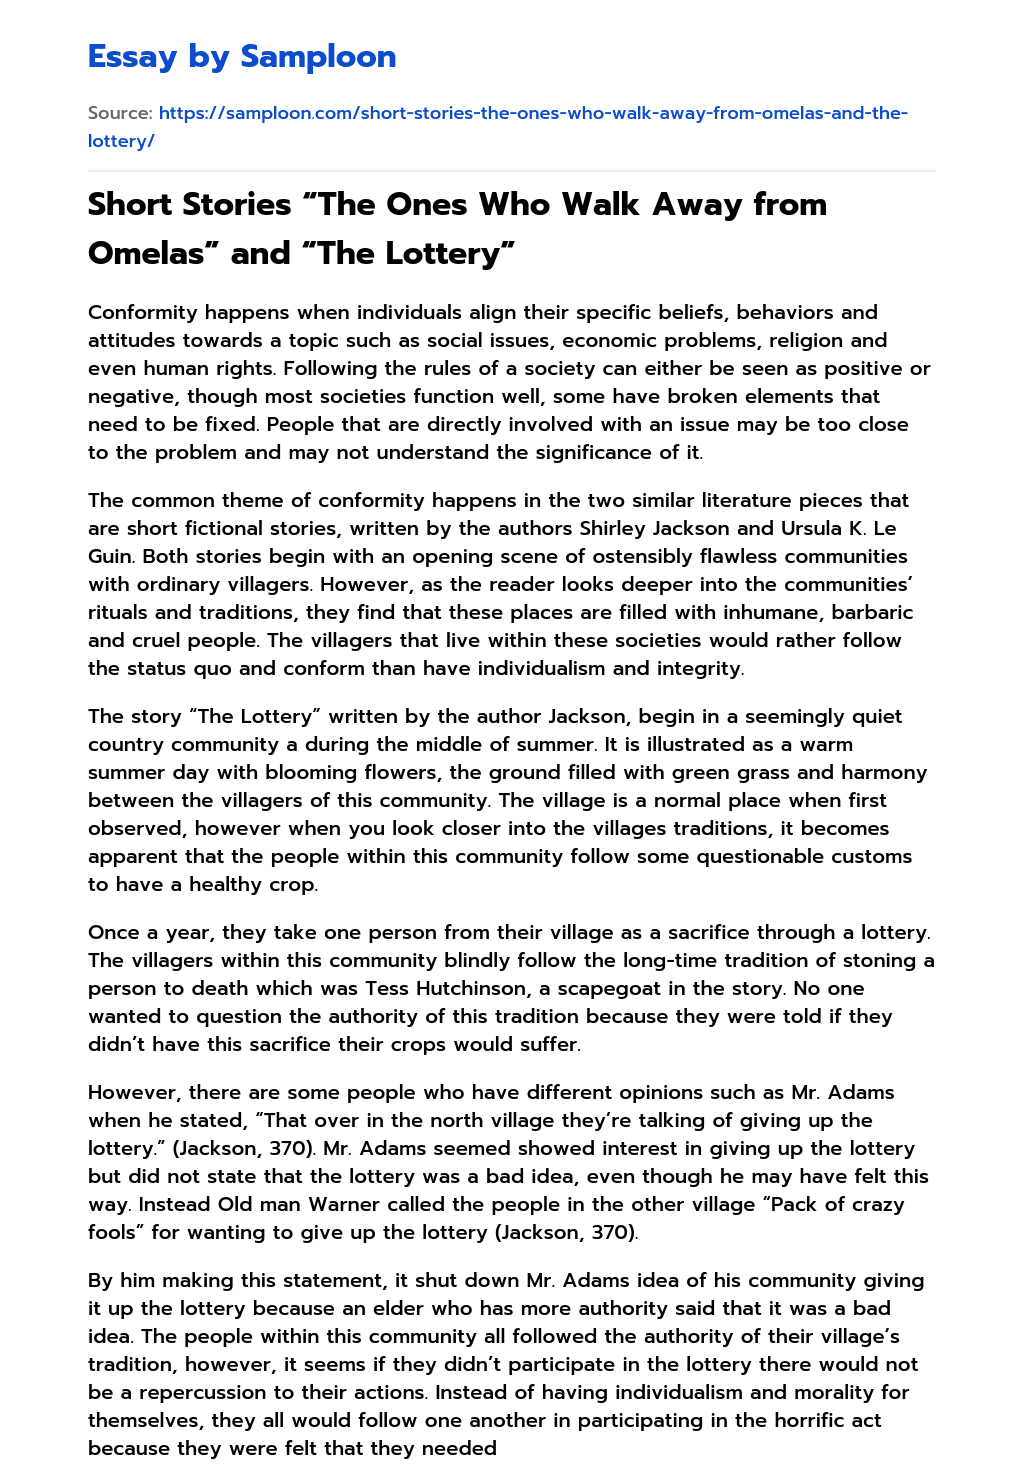 Short Stories “The Ones Who Walk Away from Omelas” and “The Lottery” essay